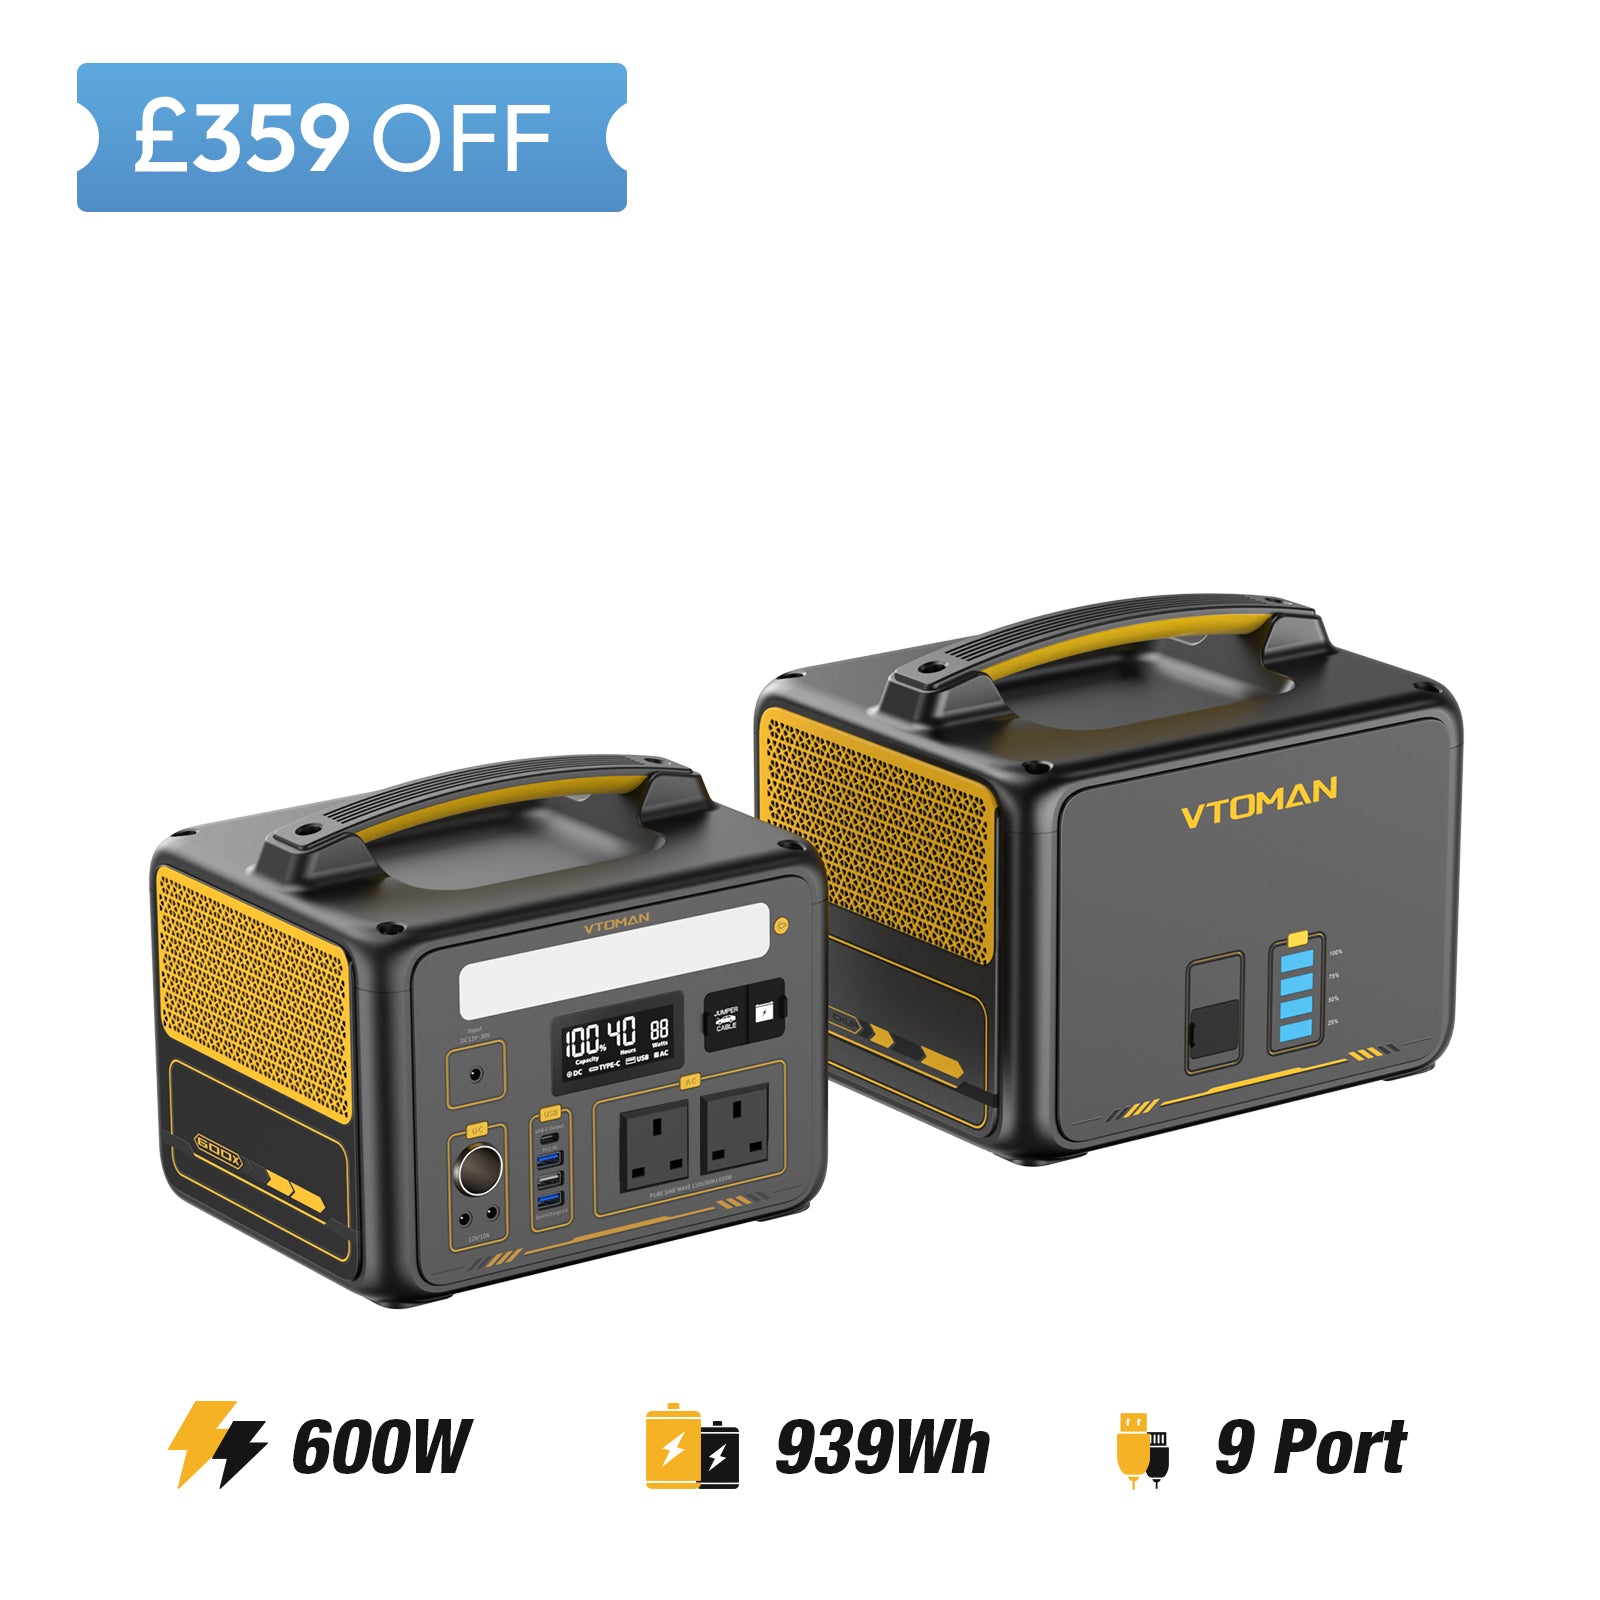 Jump 600X and 640wh extra battery save £359 in summer sale